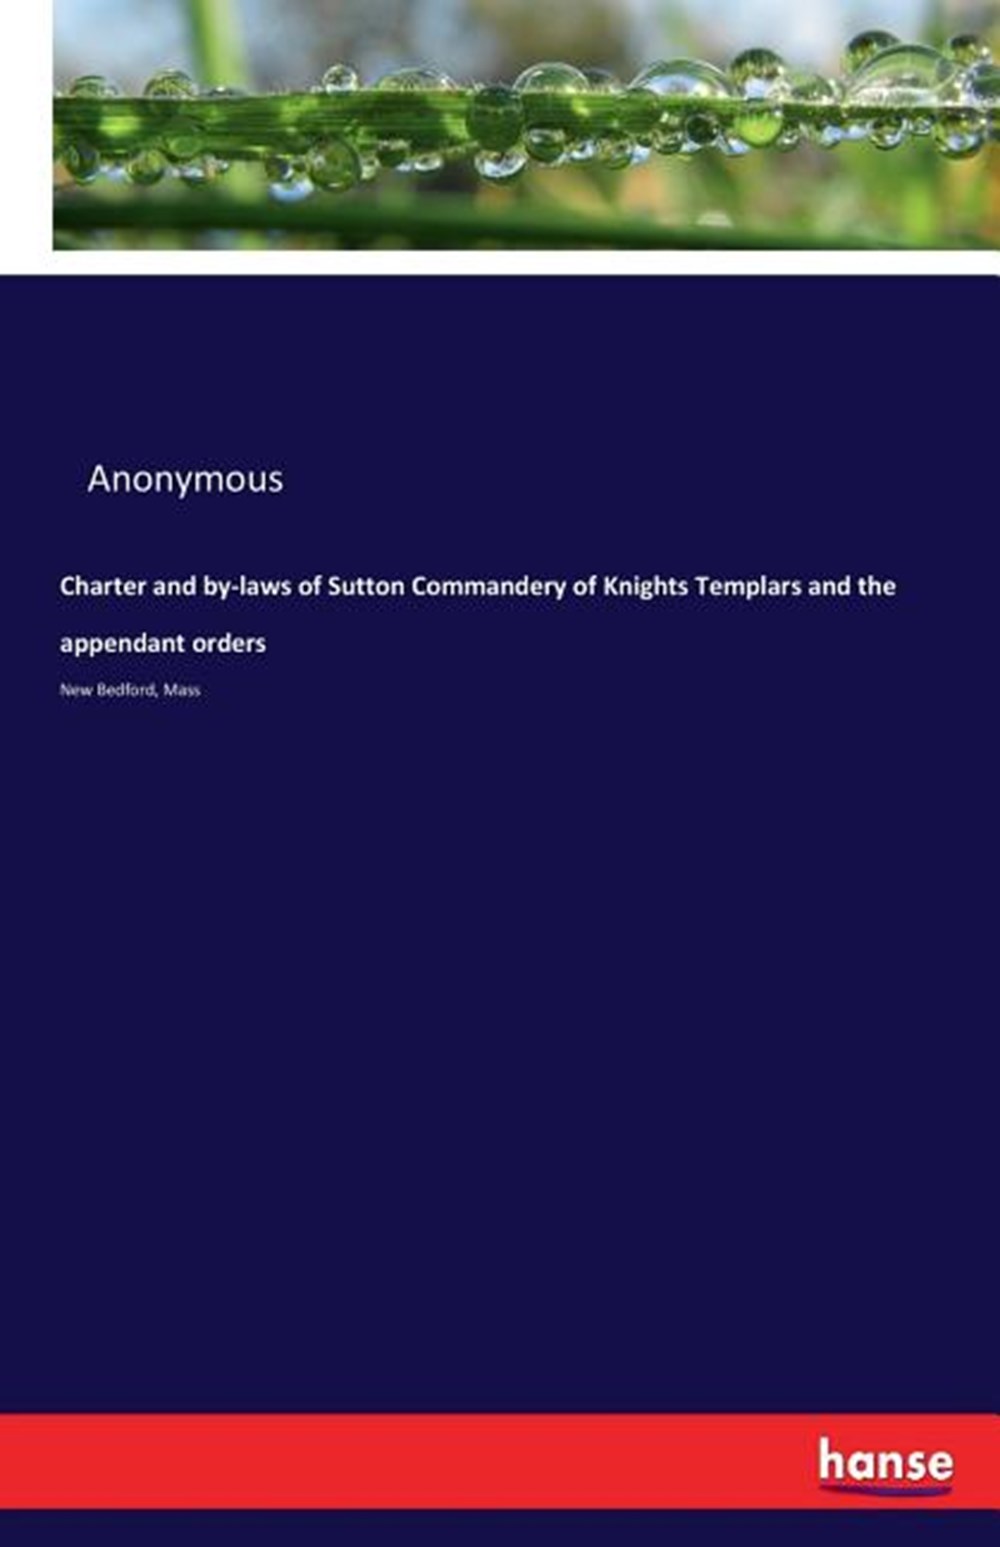 Charter and by-laws of Sutton Commandery of Knights Templars and the appendant orders: New Bedford, 